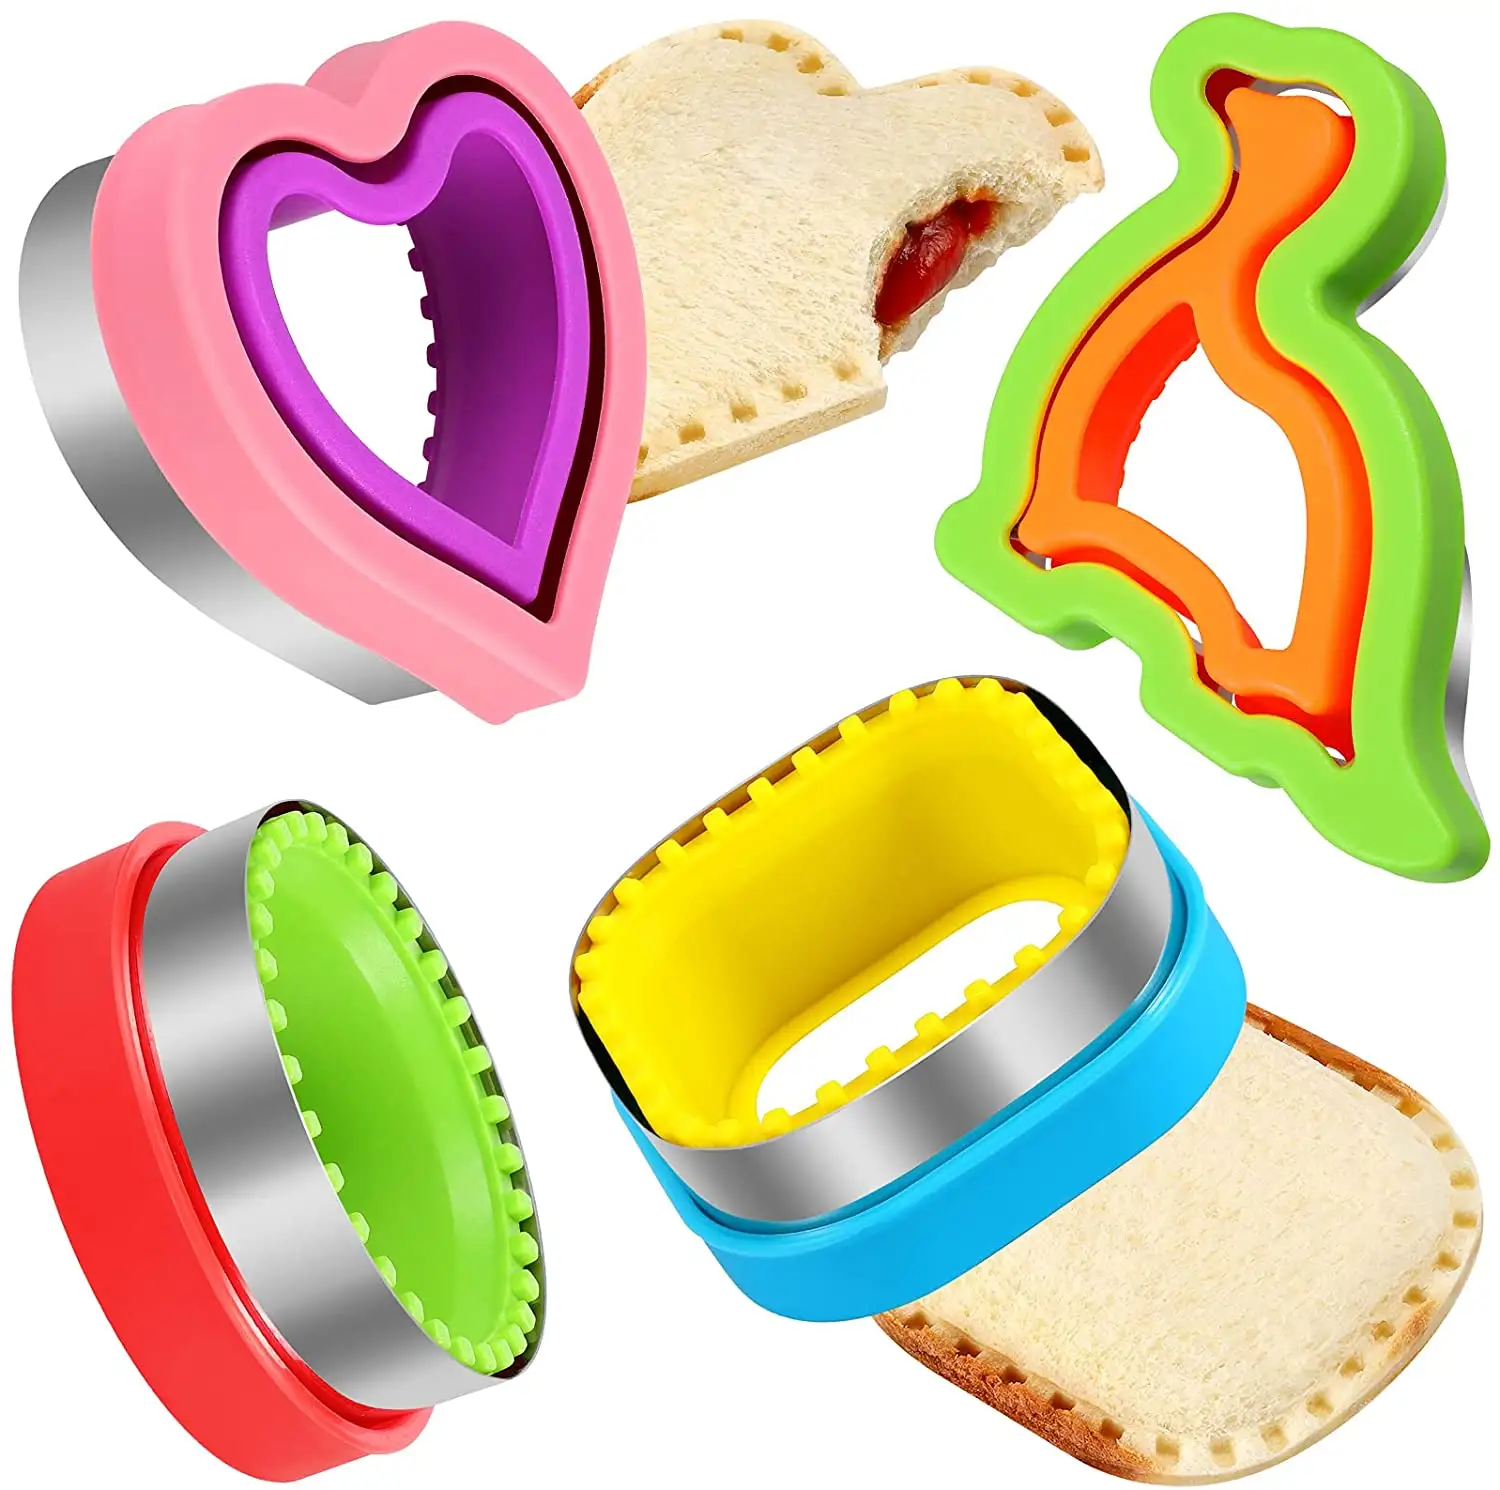 2022 New Holiday Cookie Cutters Sandwich Cutters for kids Animal Cartoon cutter cake decorating set